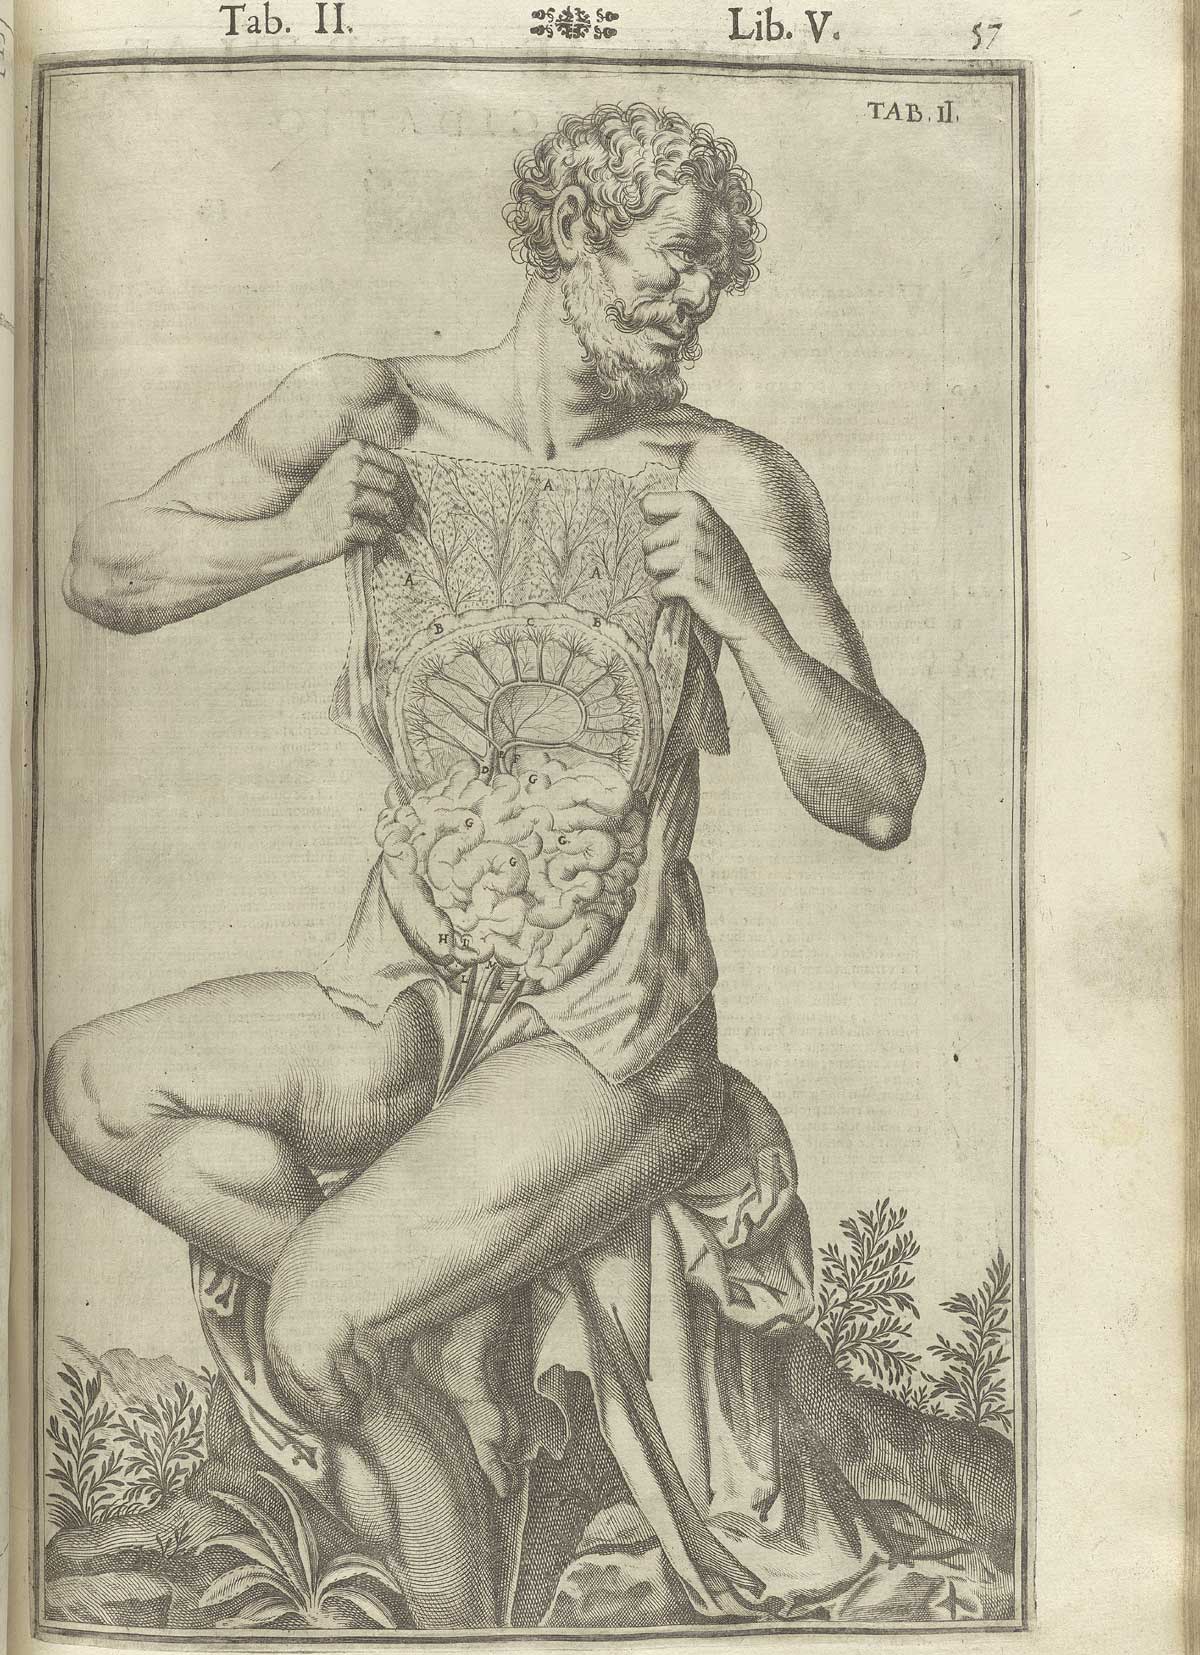 Engraving showing a frontal view of a nude bearded male anatomical figure seated on a tree stump with face turned to the right in a pastoral setting, with his abdomen cut open showing the peritoneum and intestines exposed in detail; from Adriaan van de Spiegel and Giulio Cassieri’s De humani corporis fabrica libri decem, Venice, 1627, NLM call no. WZ 250 S755dh 1627.